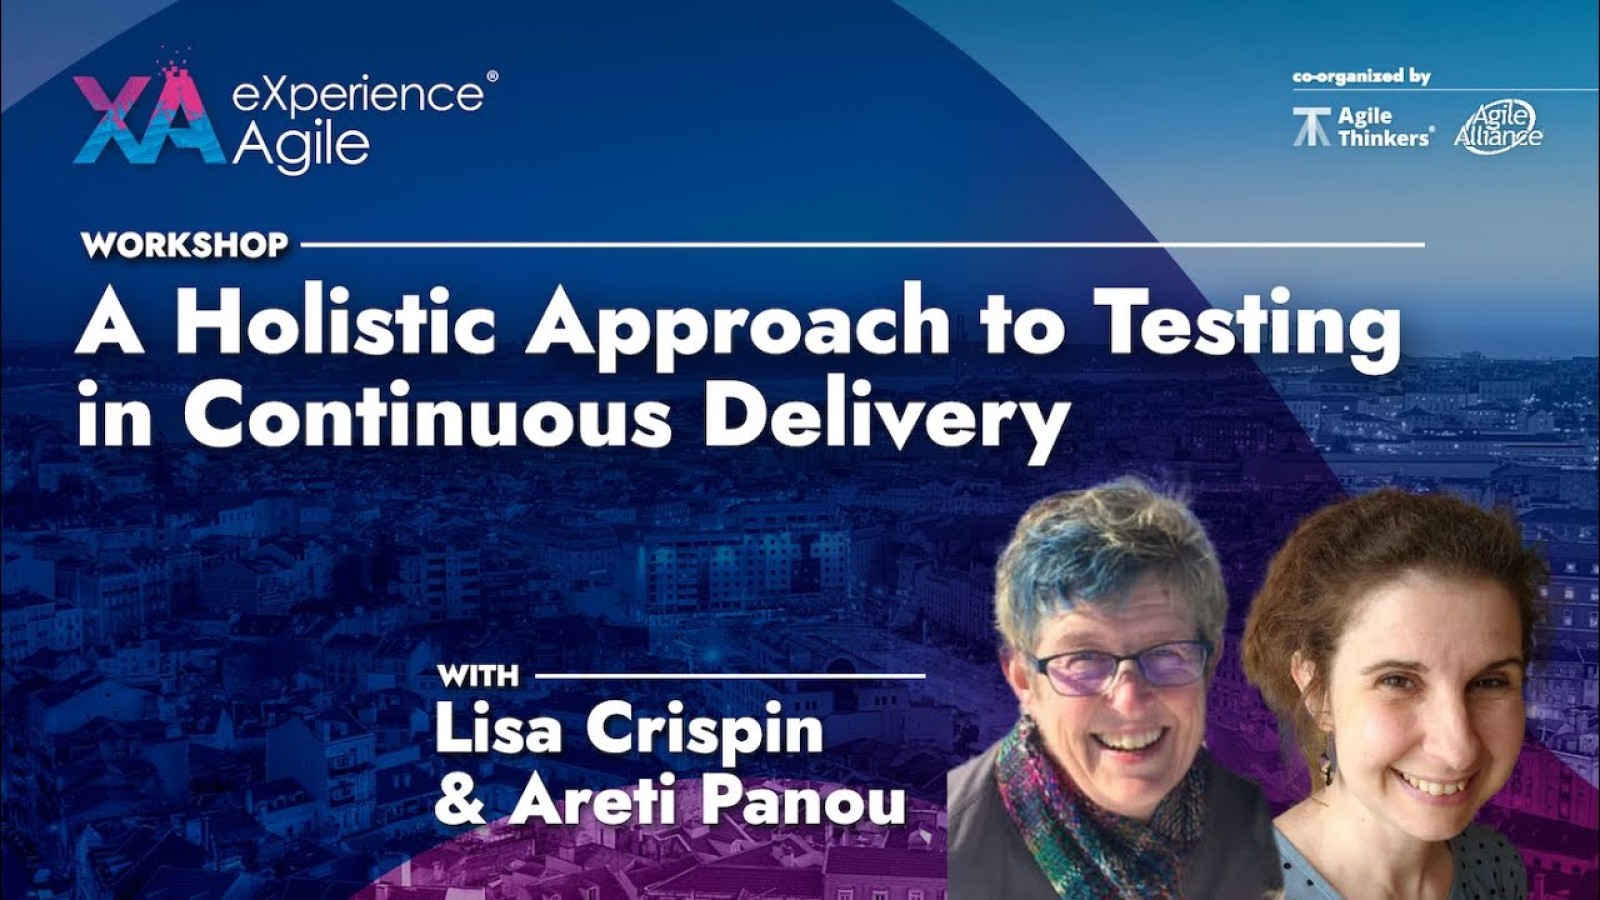 A Whole Team Approach to Testing in Continuous Delivery